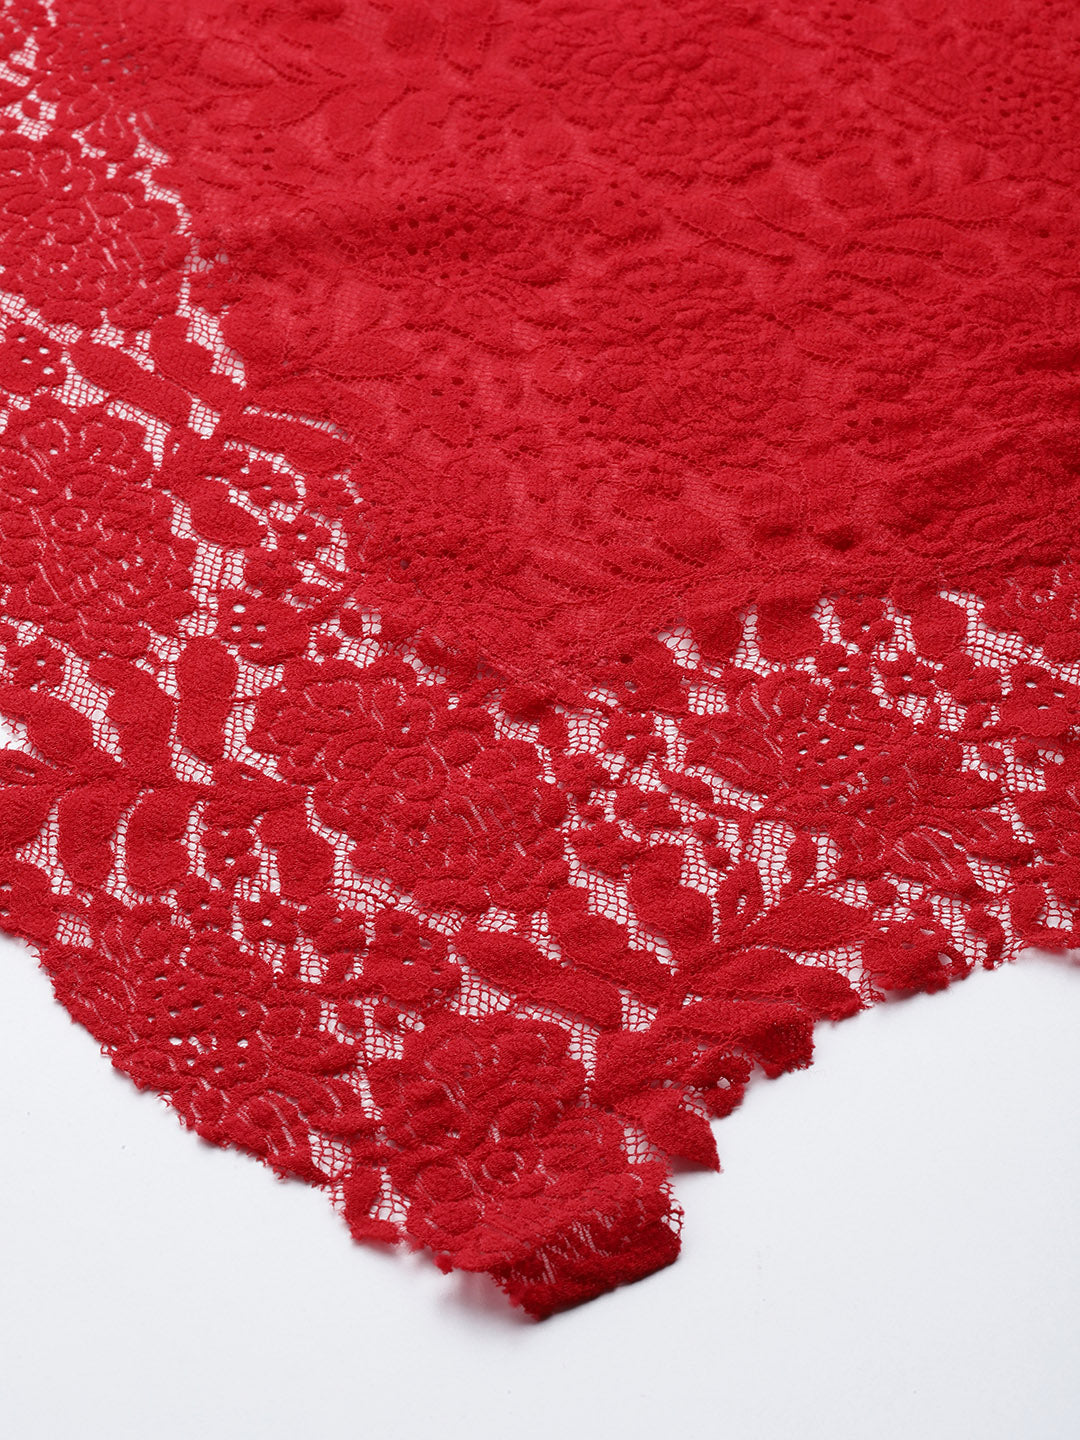 woolen scarves for ladies, red shawl 